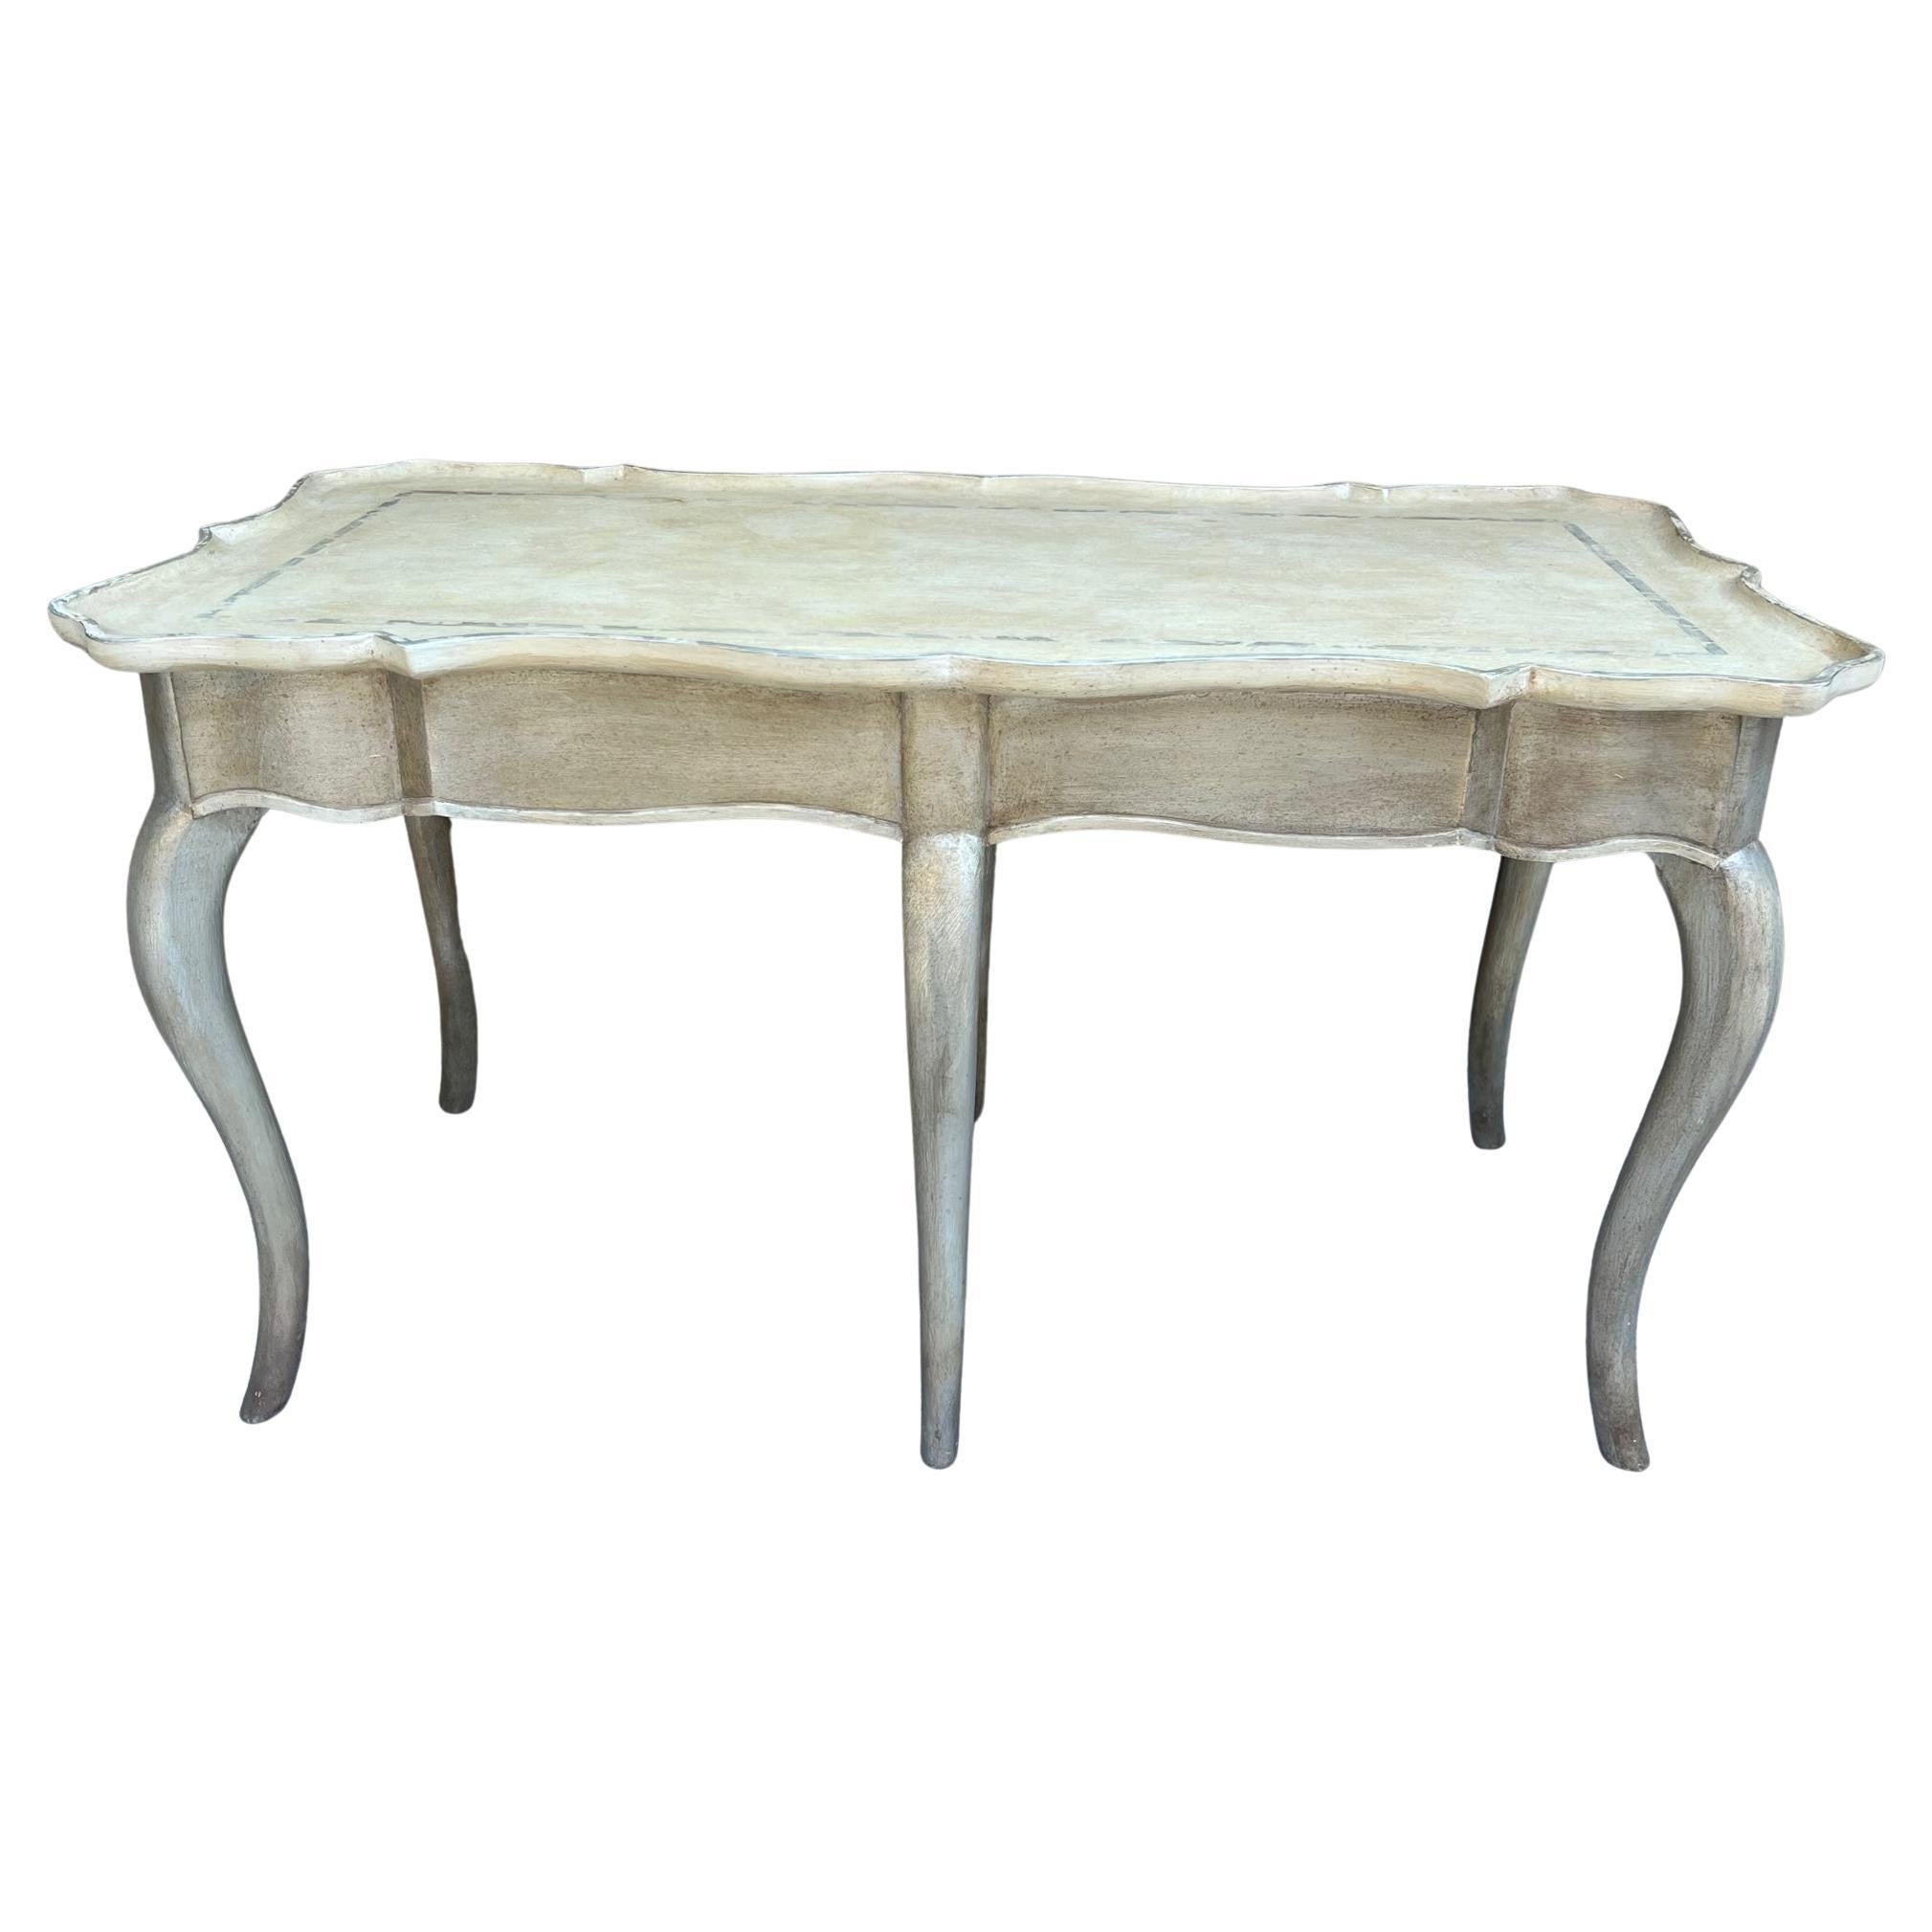 Brustlin Workshop Coffee Table in Distressed Patina For Sale